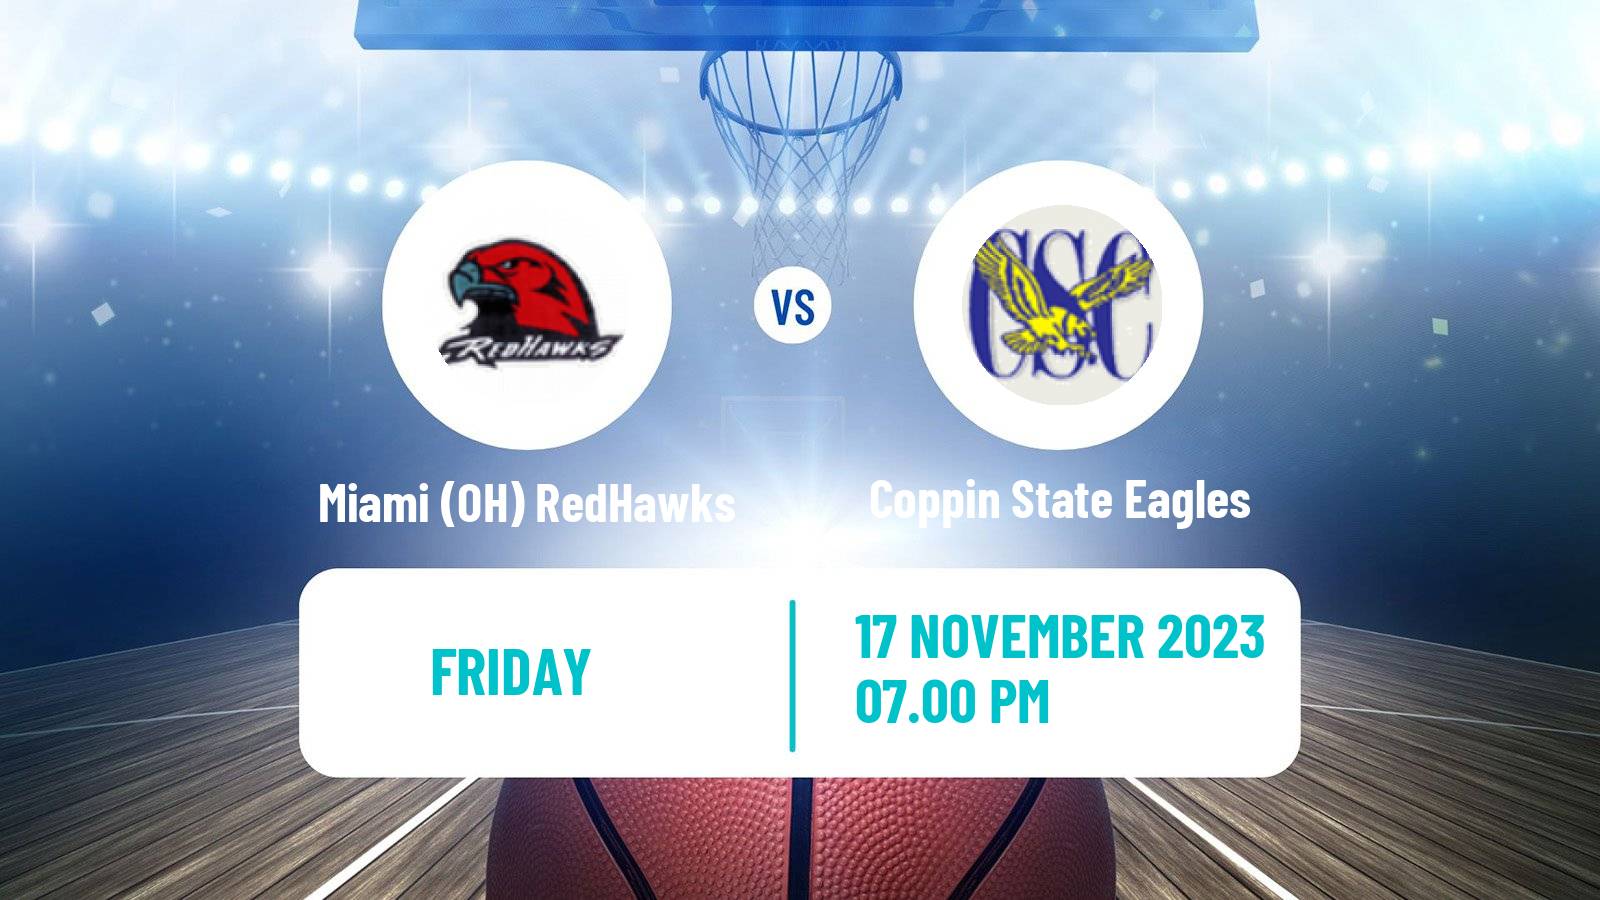 Basketball NCAA College Basketball Miami (OH) RedHawks - Coppin State Eagles